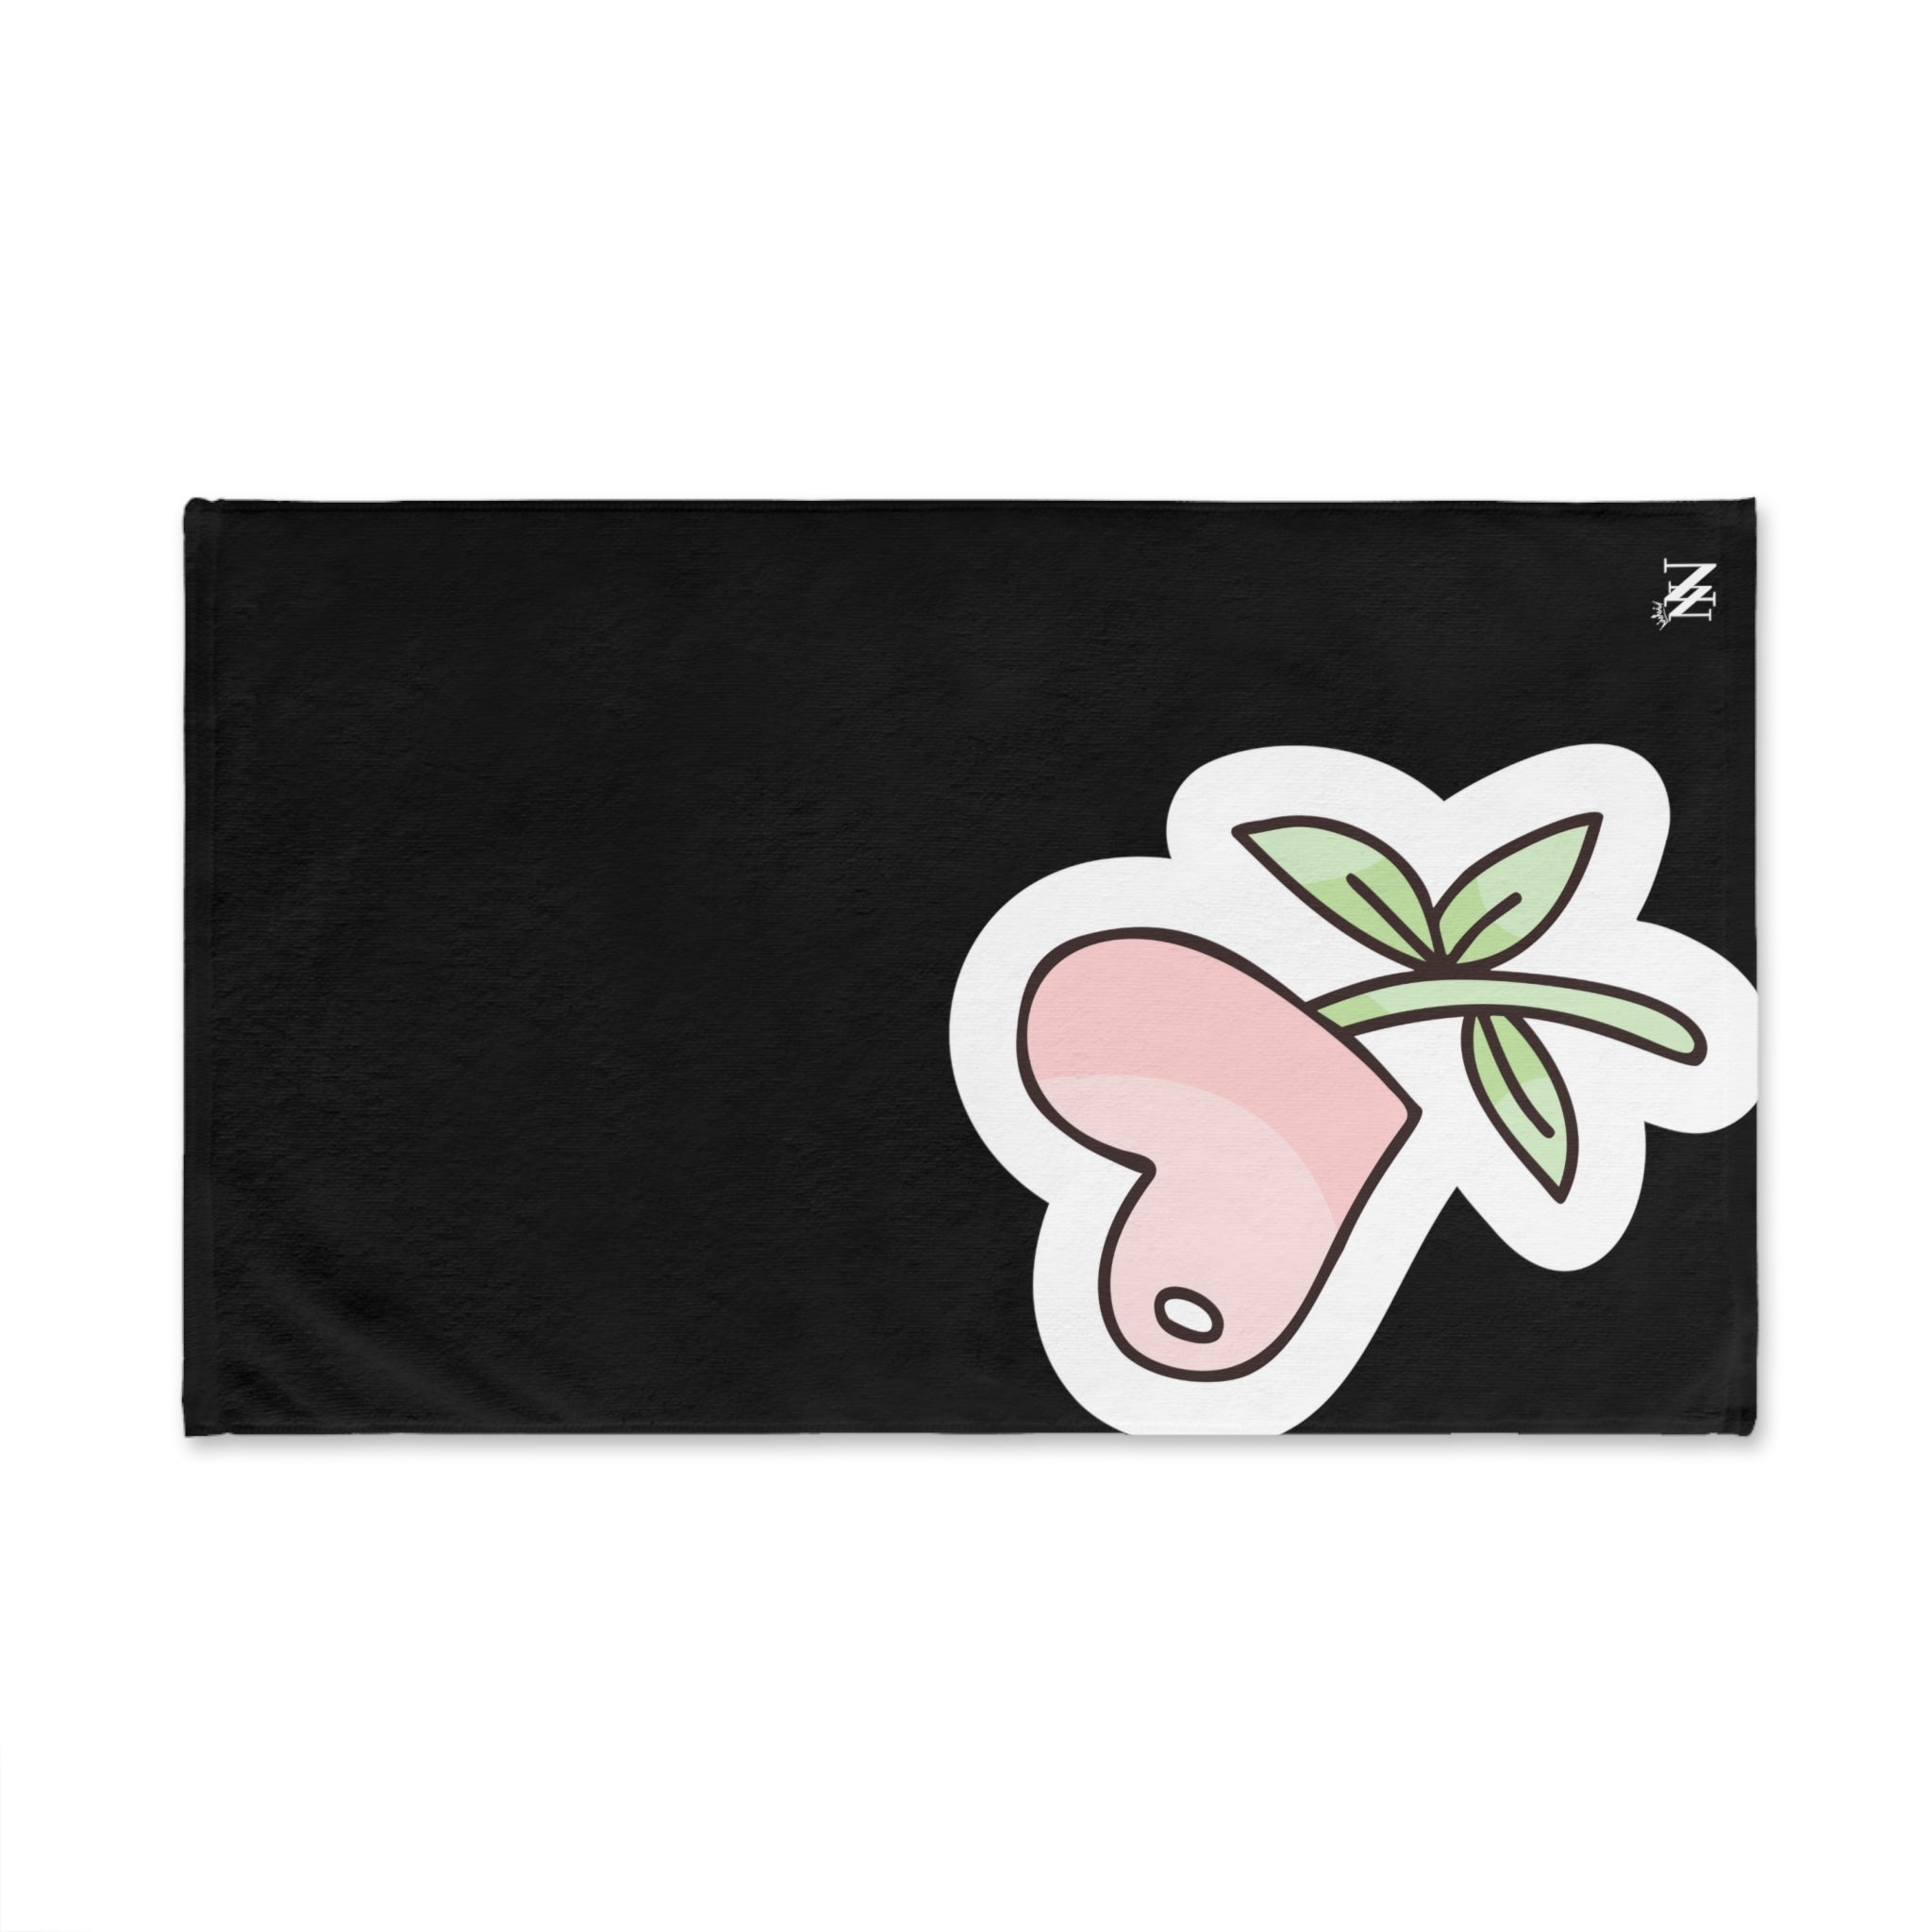 Flower Sticker HeartBlack | Sexy Gifts for Boyfriend, Funny Towel Romantic Gift for Wedding Couple Fiance First Year 2nd Anniversary Valentines, Party Gag Gifts, Joke Humor Cloth for Husband Men BF NECTAR NAPKINS